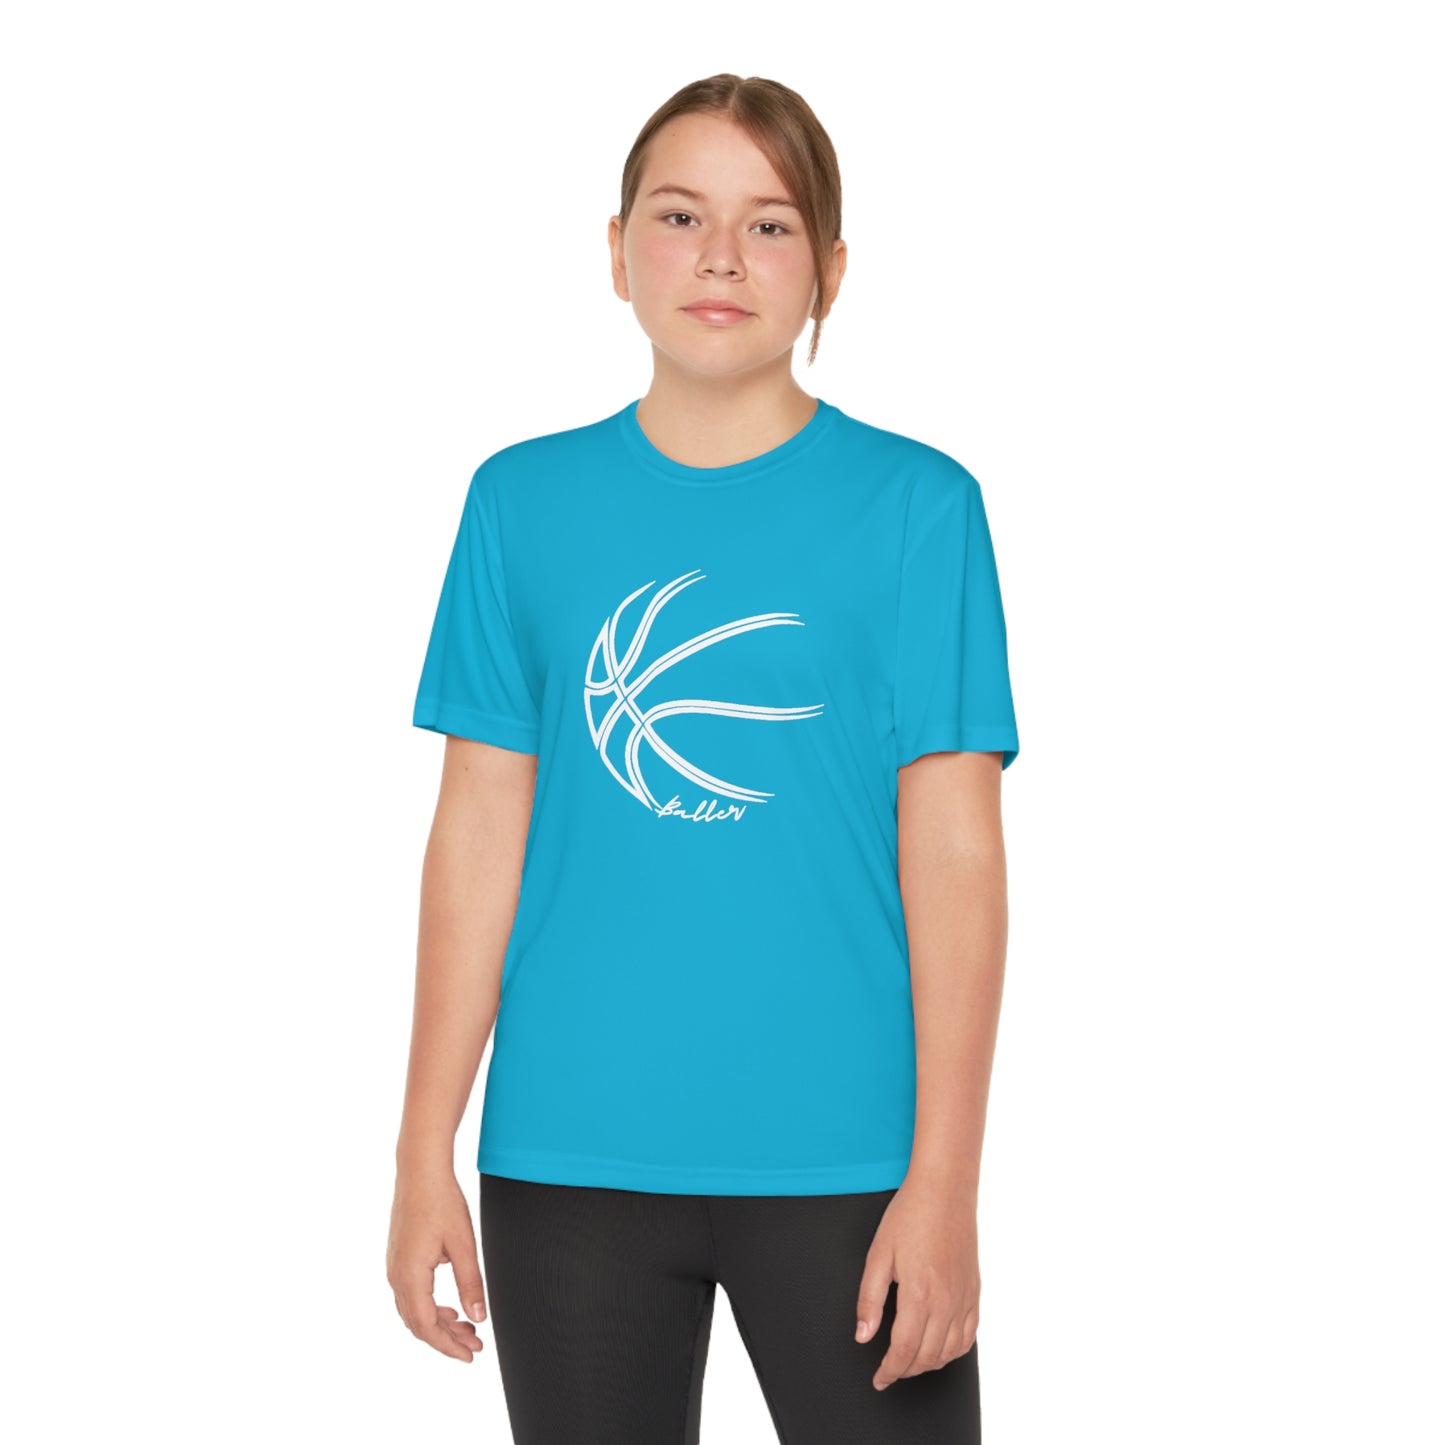 Baller - Youth Competitor Tee